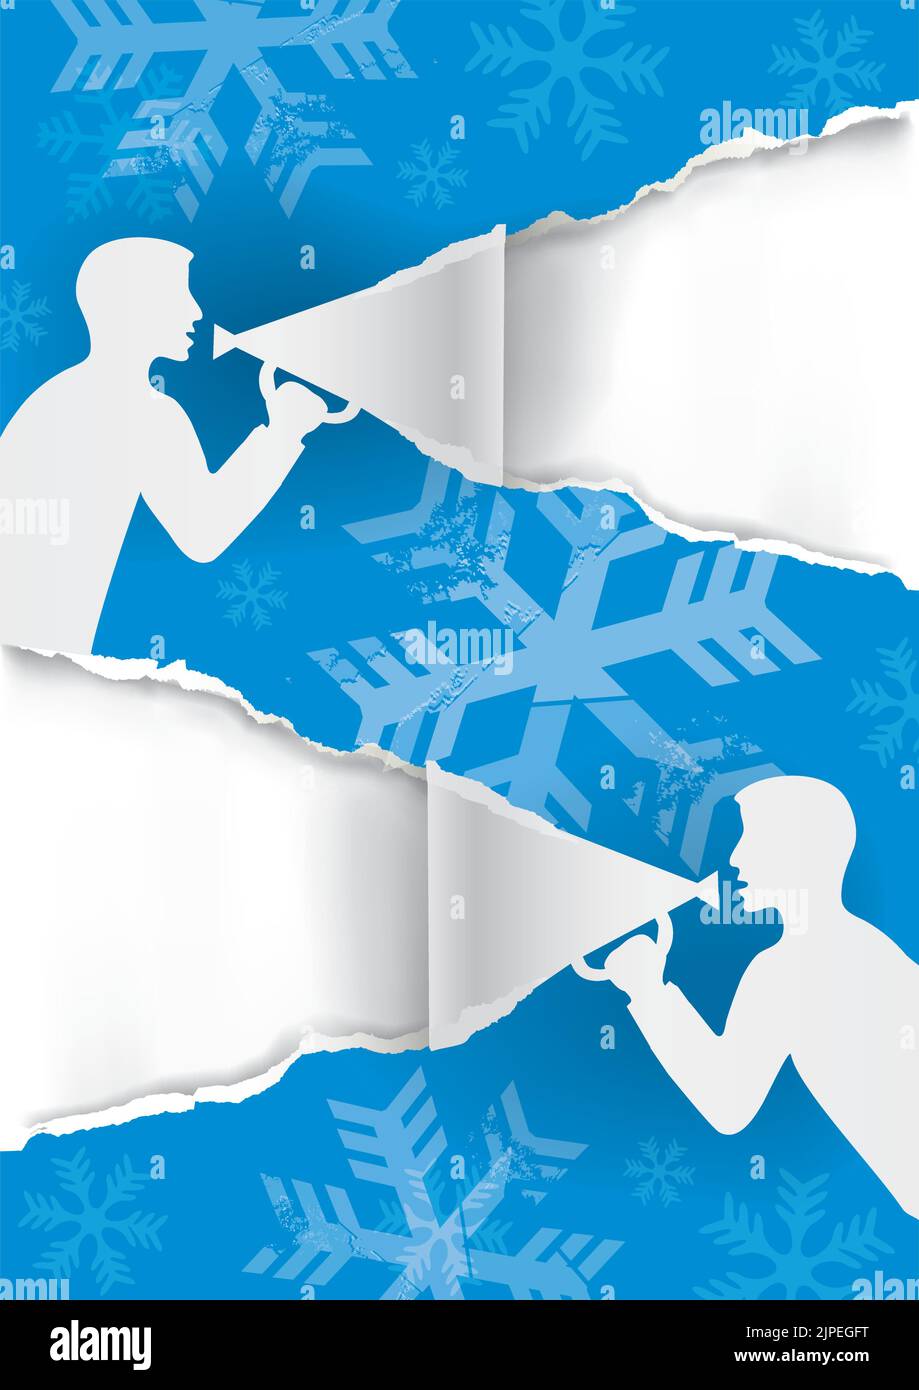 Two Men with megaphone tearing blue paper, Christmas banner template. Illustration of paper background with grunge stylized snowflakes. Stock Vector